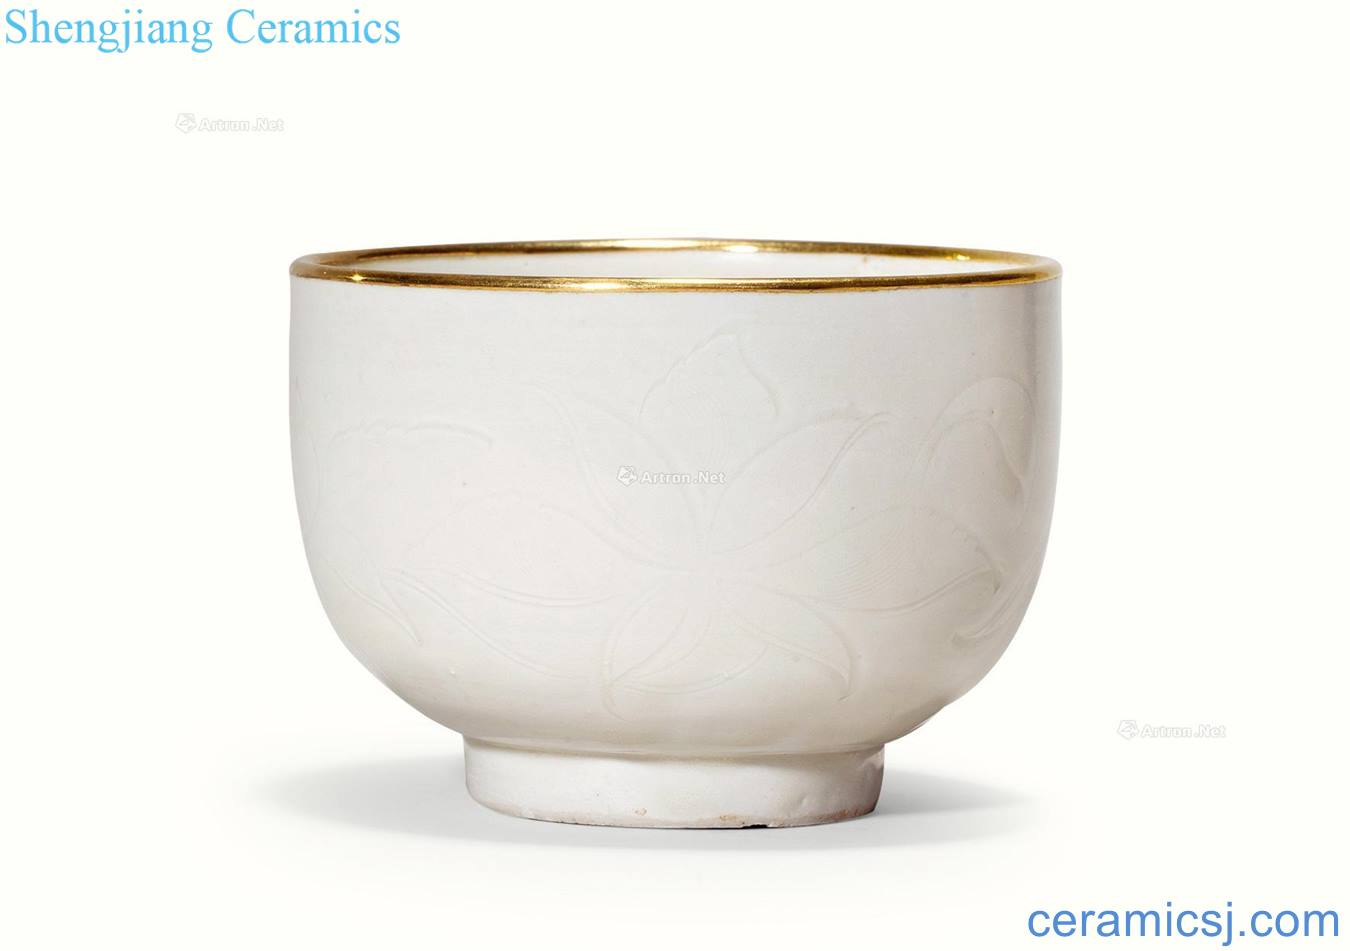 Northern song dynasty kiln carved xuan -- gold 11 to 13 century decorative pattern pier small bowl